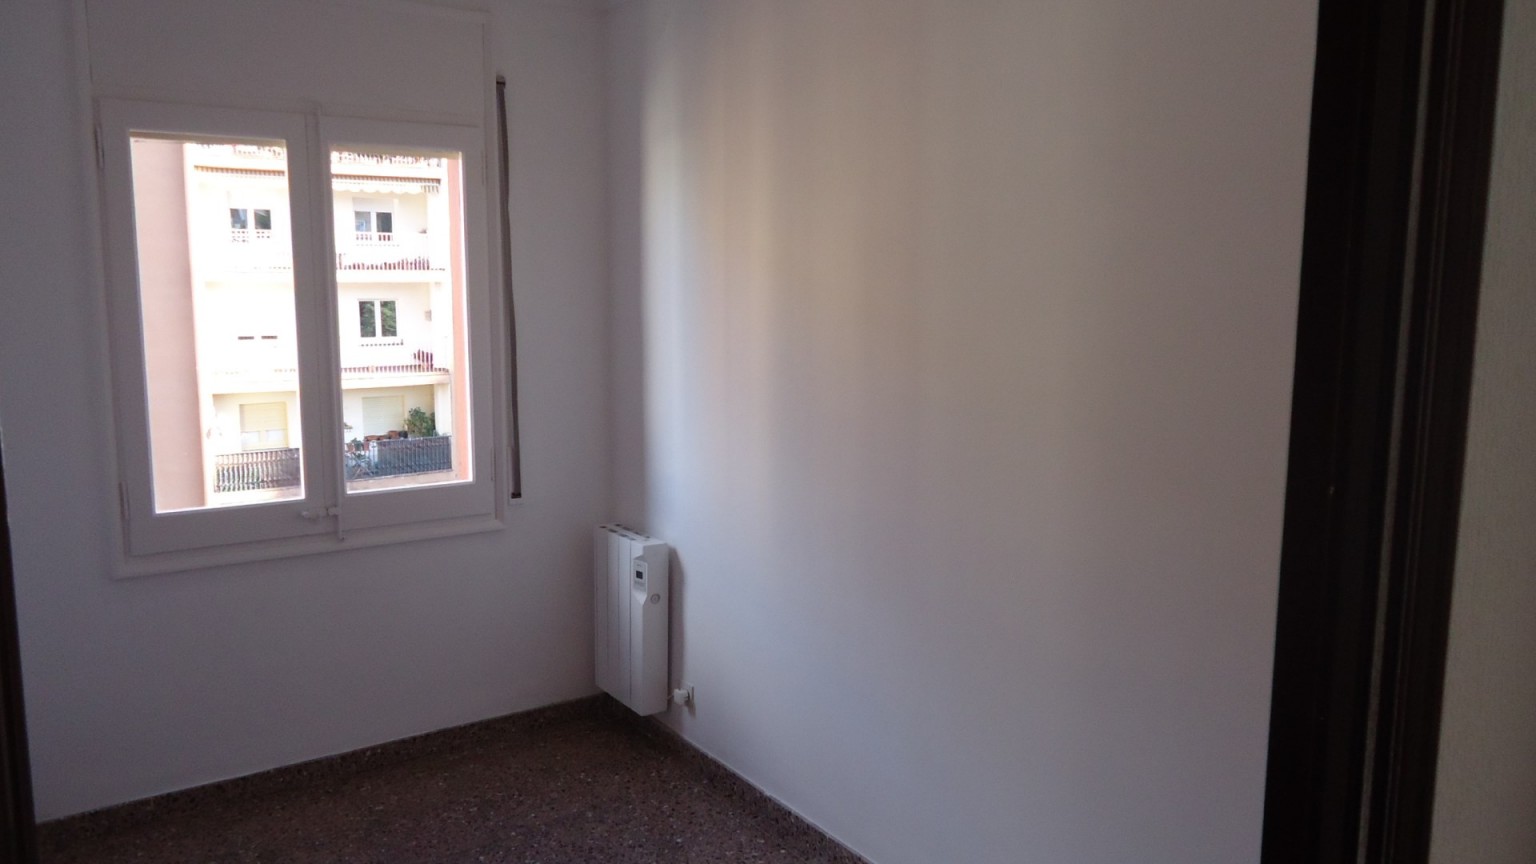 Flat for sale, ideal for investors, currently rented.